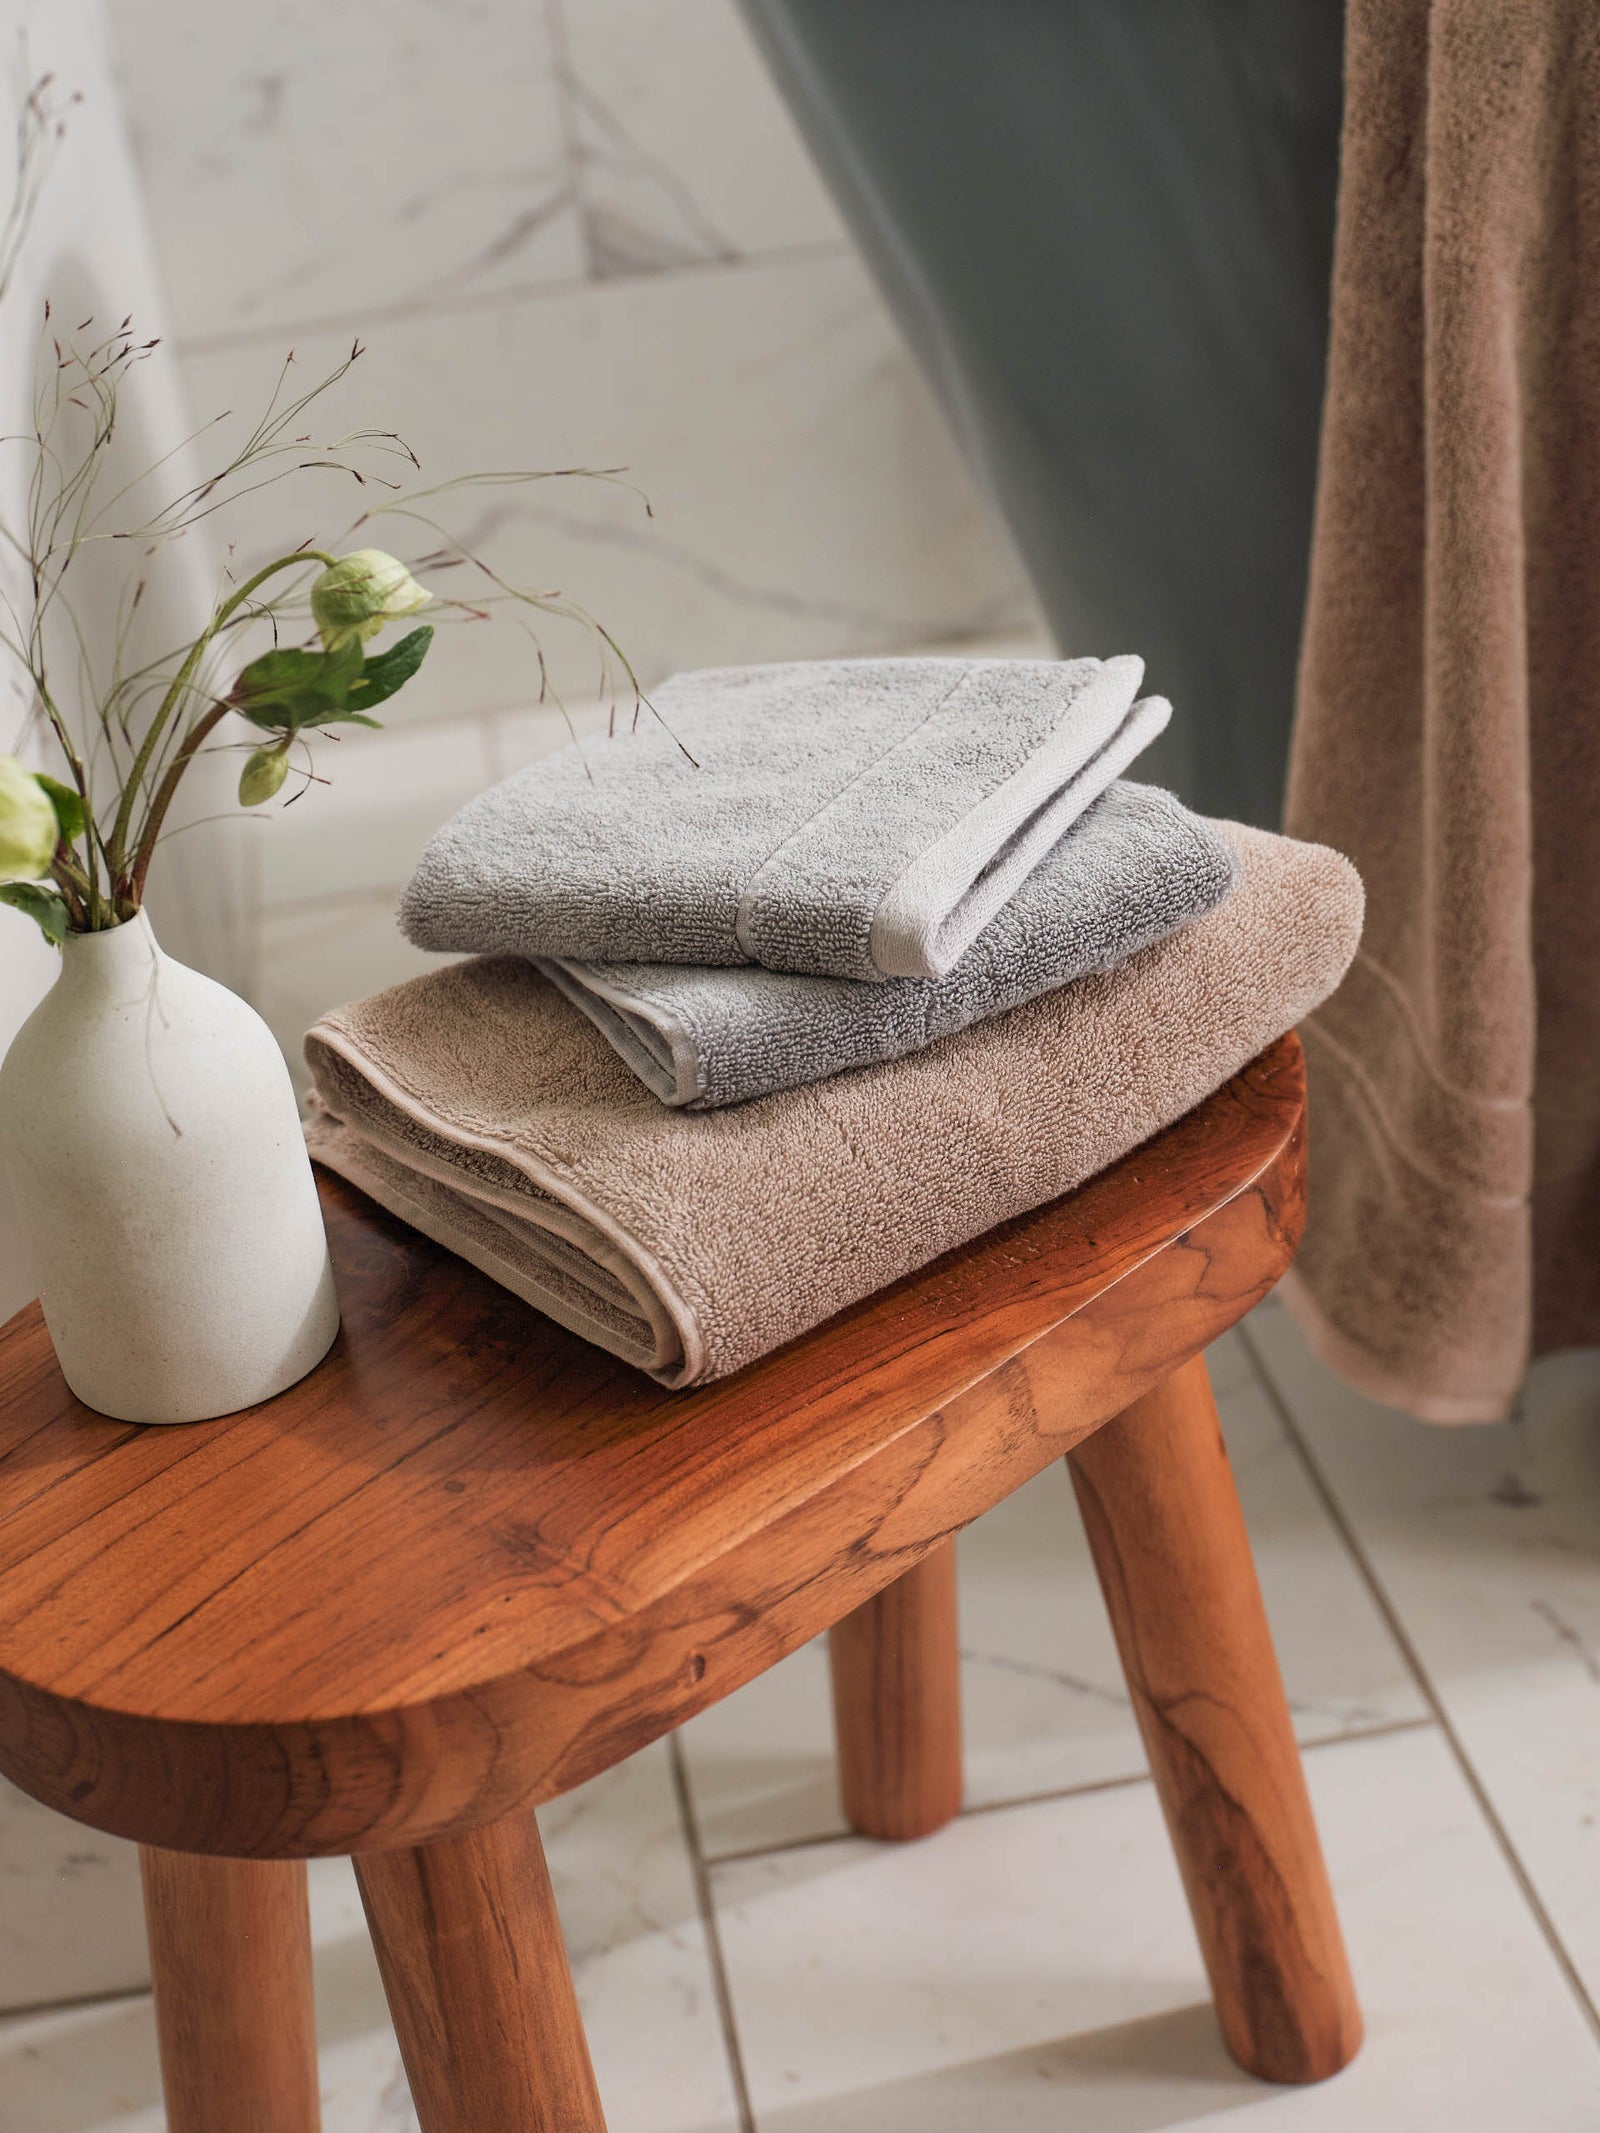 Premium Plush bath towel and wash cloth in the color Sand and Harbor Mist. Photo of Sand, Harbor Mist Premium Plush items taken on stool in a bathroom.